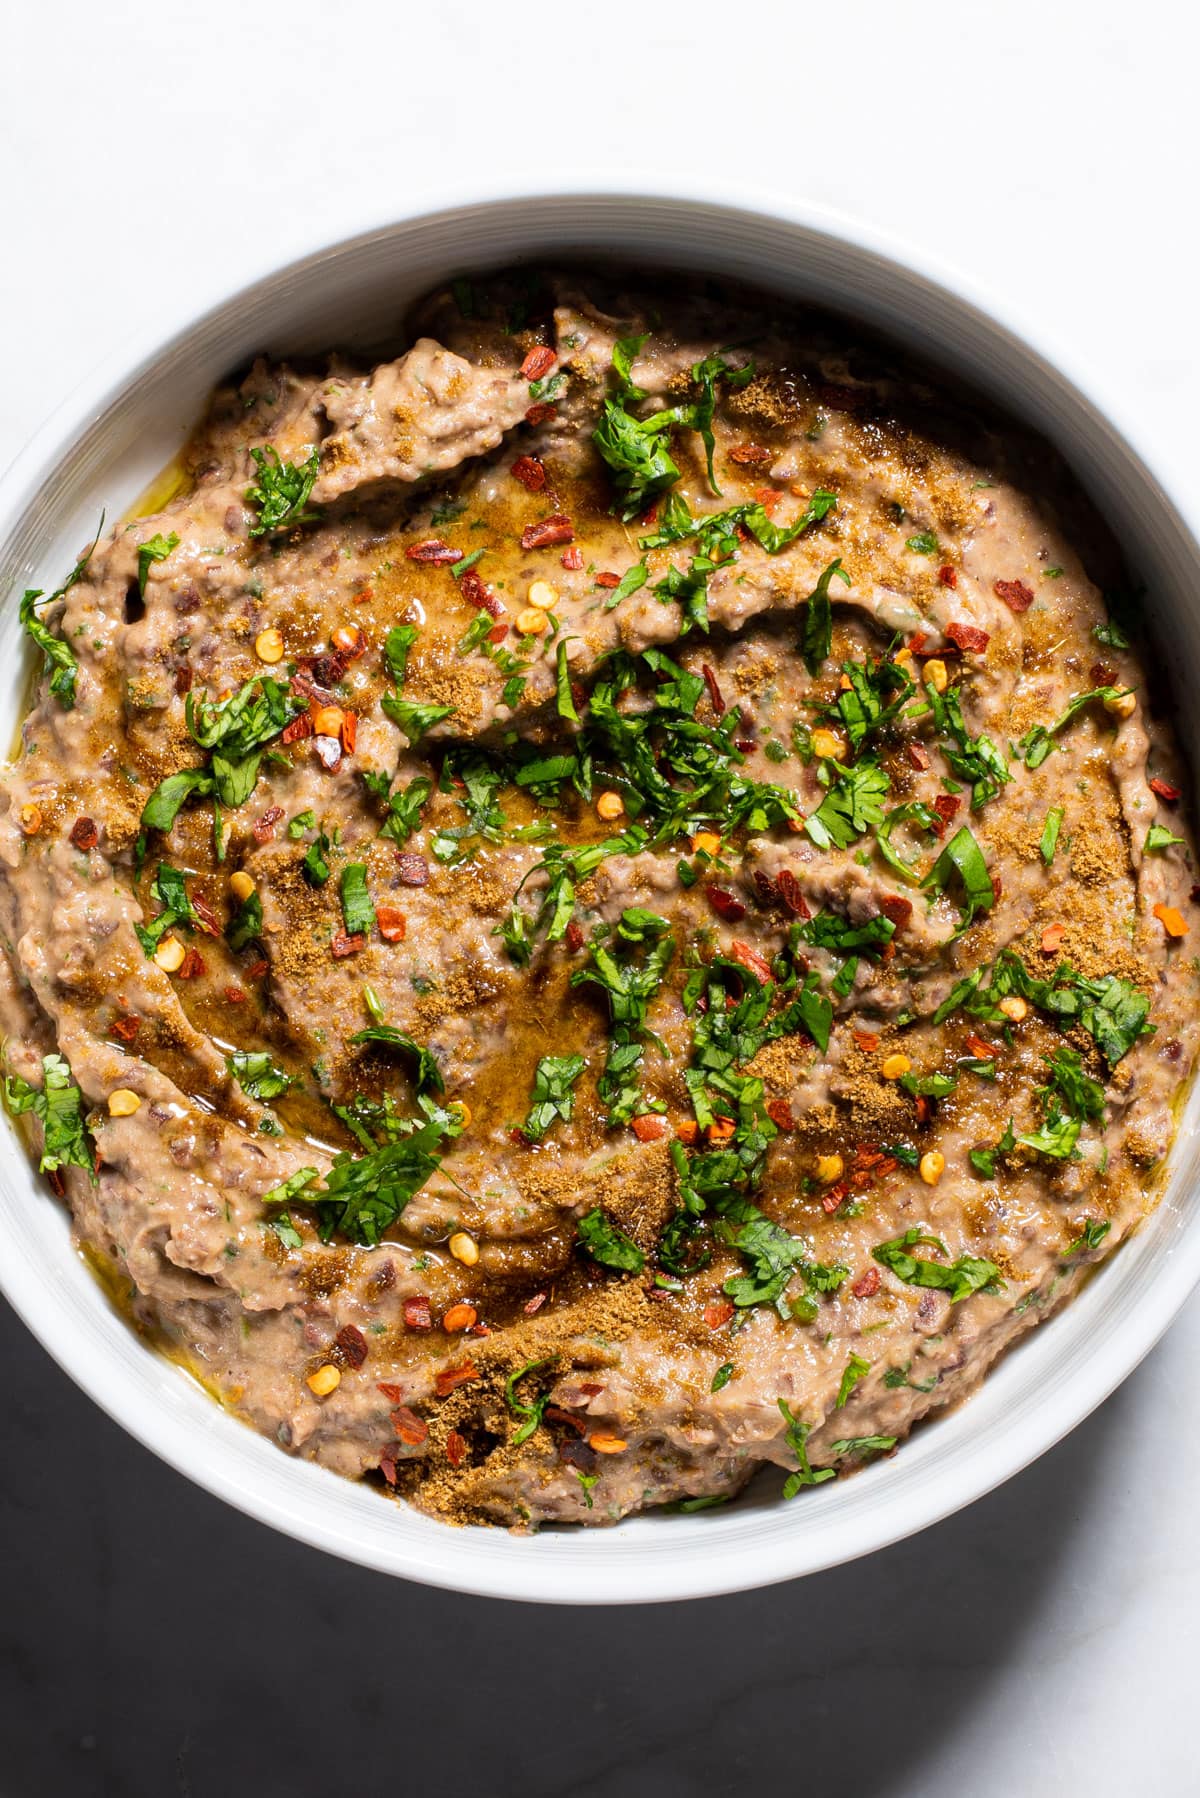 Creamy Mexican black bean dip in a white bowl, sprinkled with cilantro.